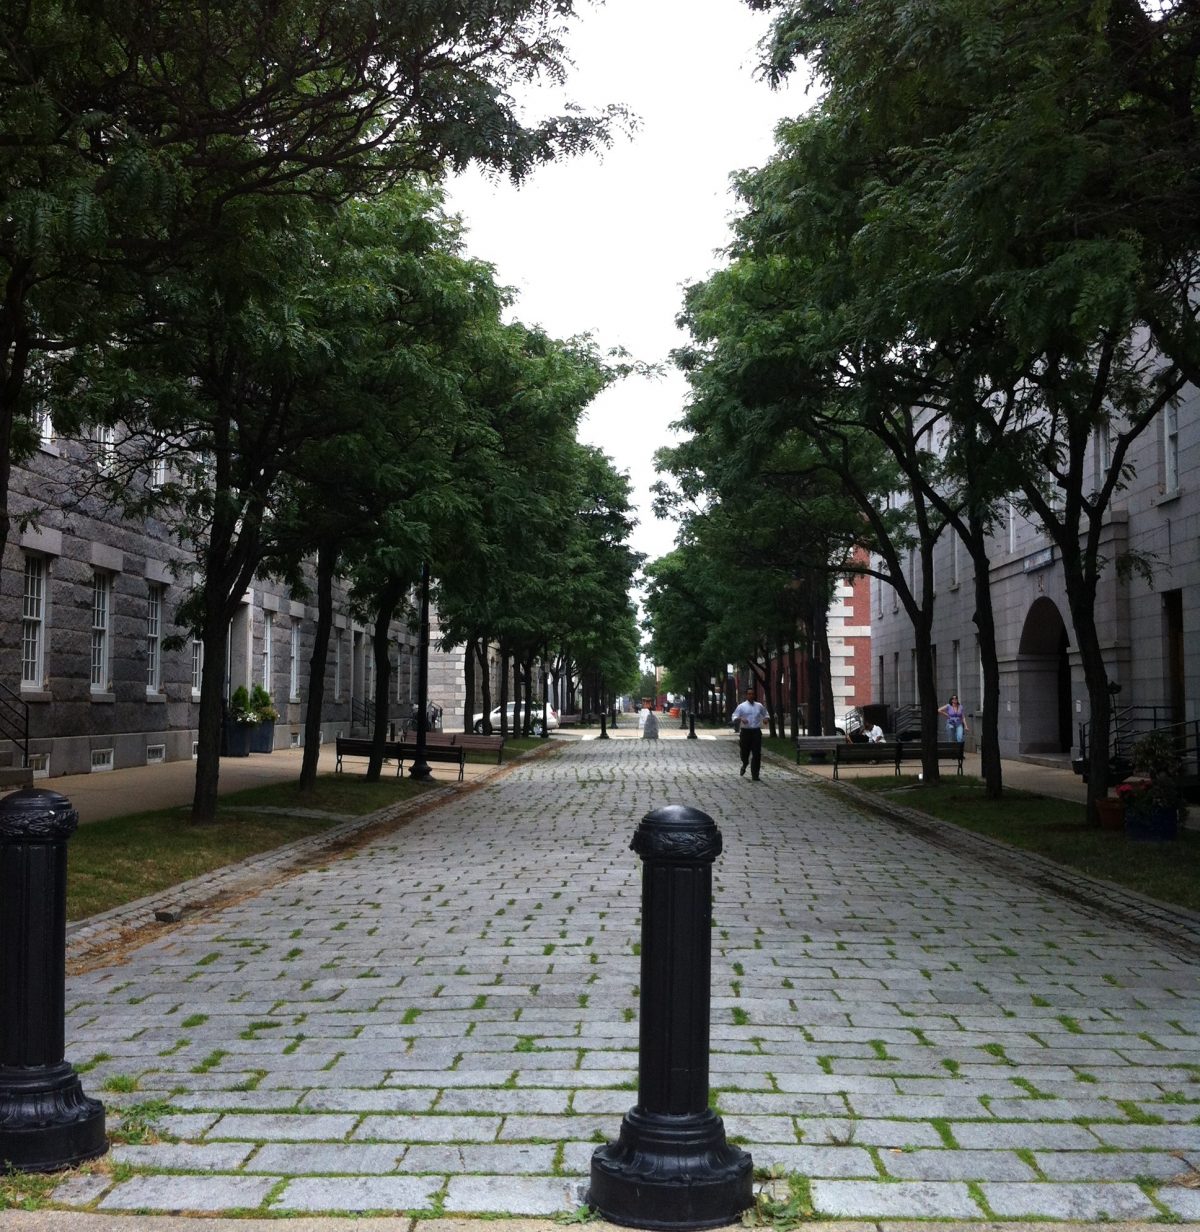 Looking down Second Ave. at the Charlestown Navy Yard in Boston, Buildings 33 & 34 in foreground, 38 & 39 in background (Photo: Sarah Sundin, July 2014)